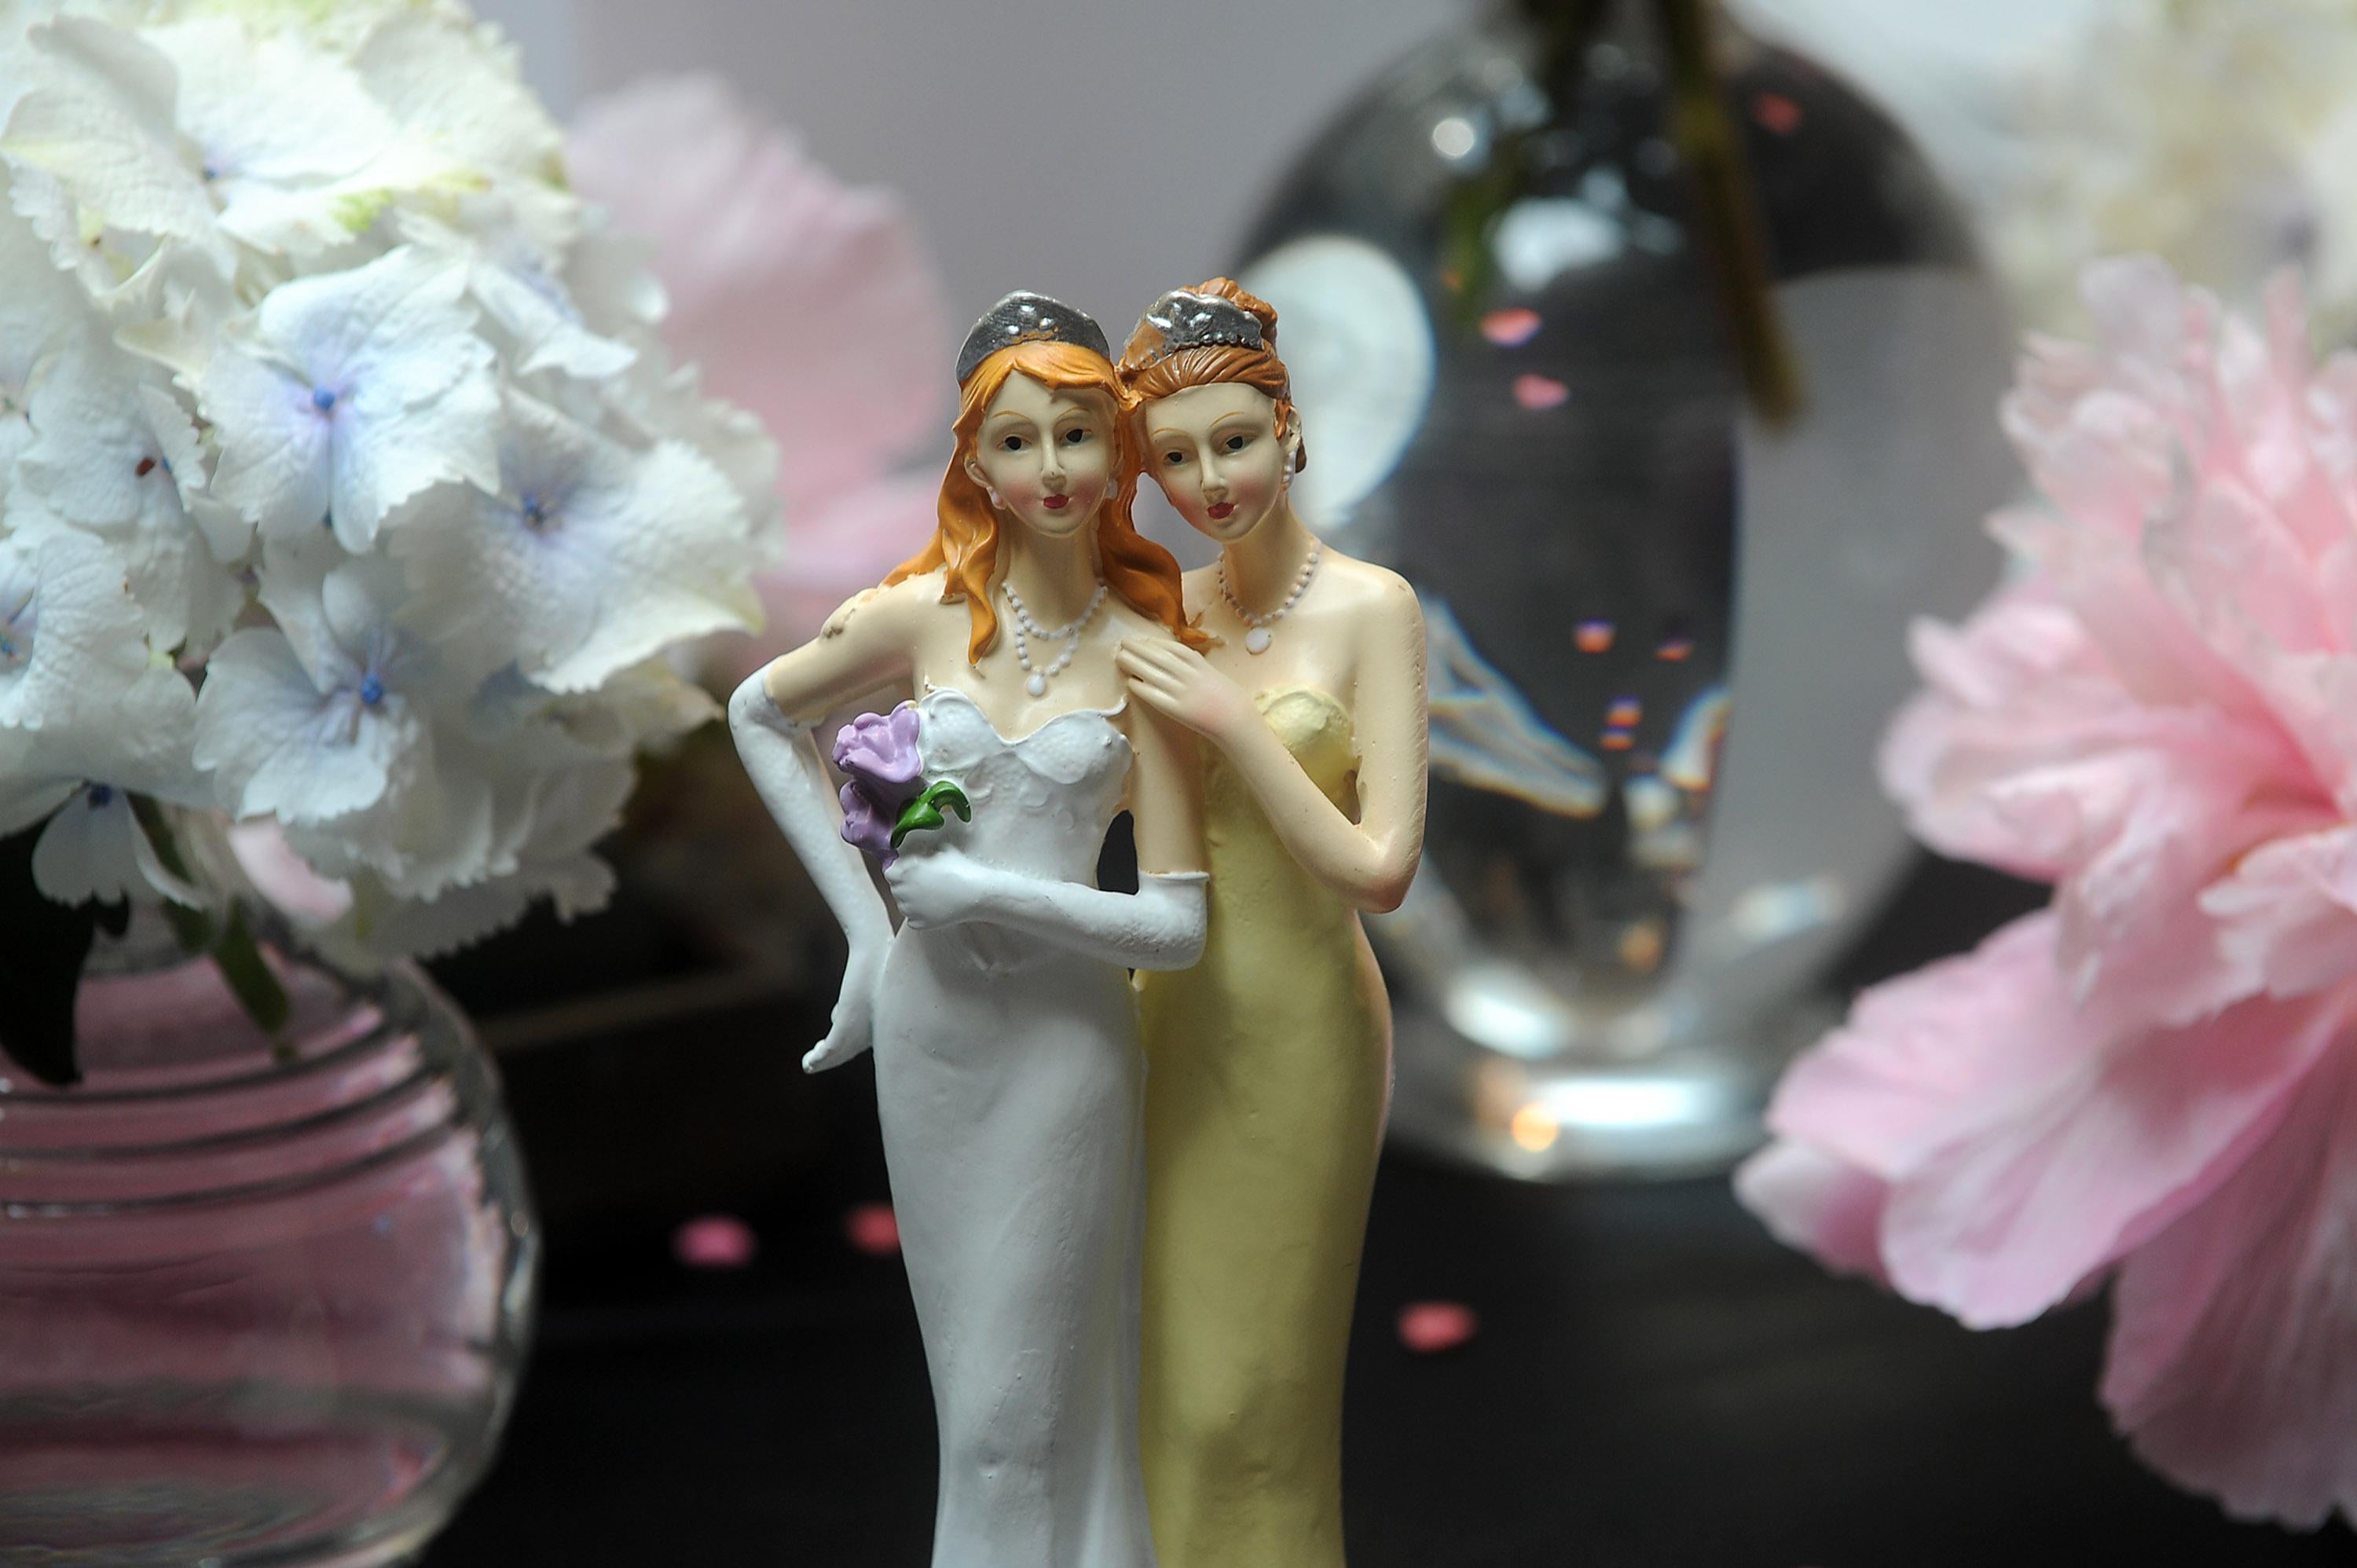 Plastic figurines of same-sex couples are displayed at the gay marriage show.